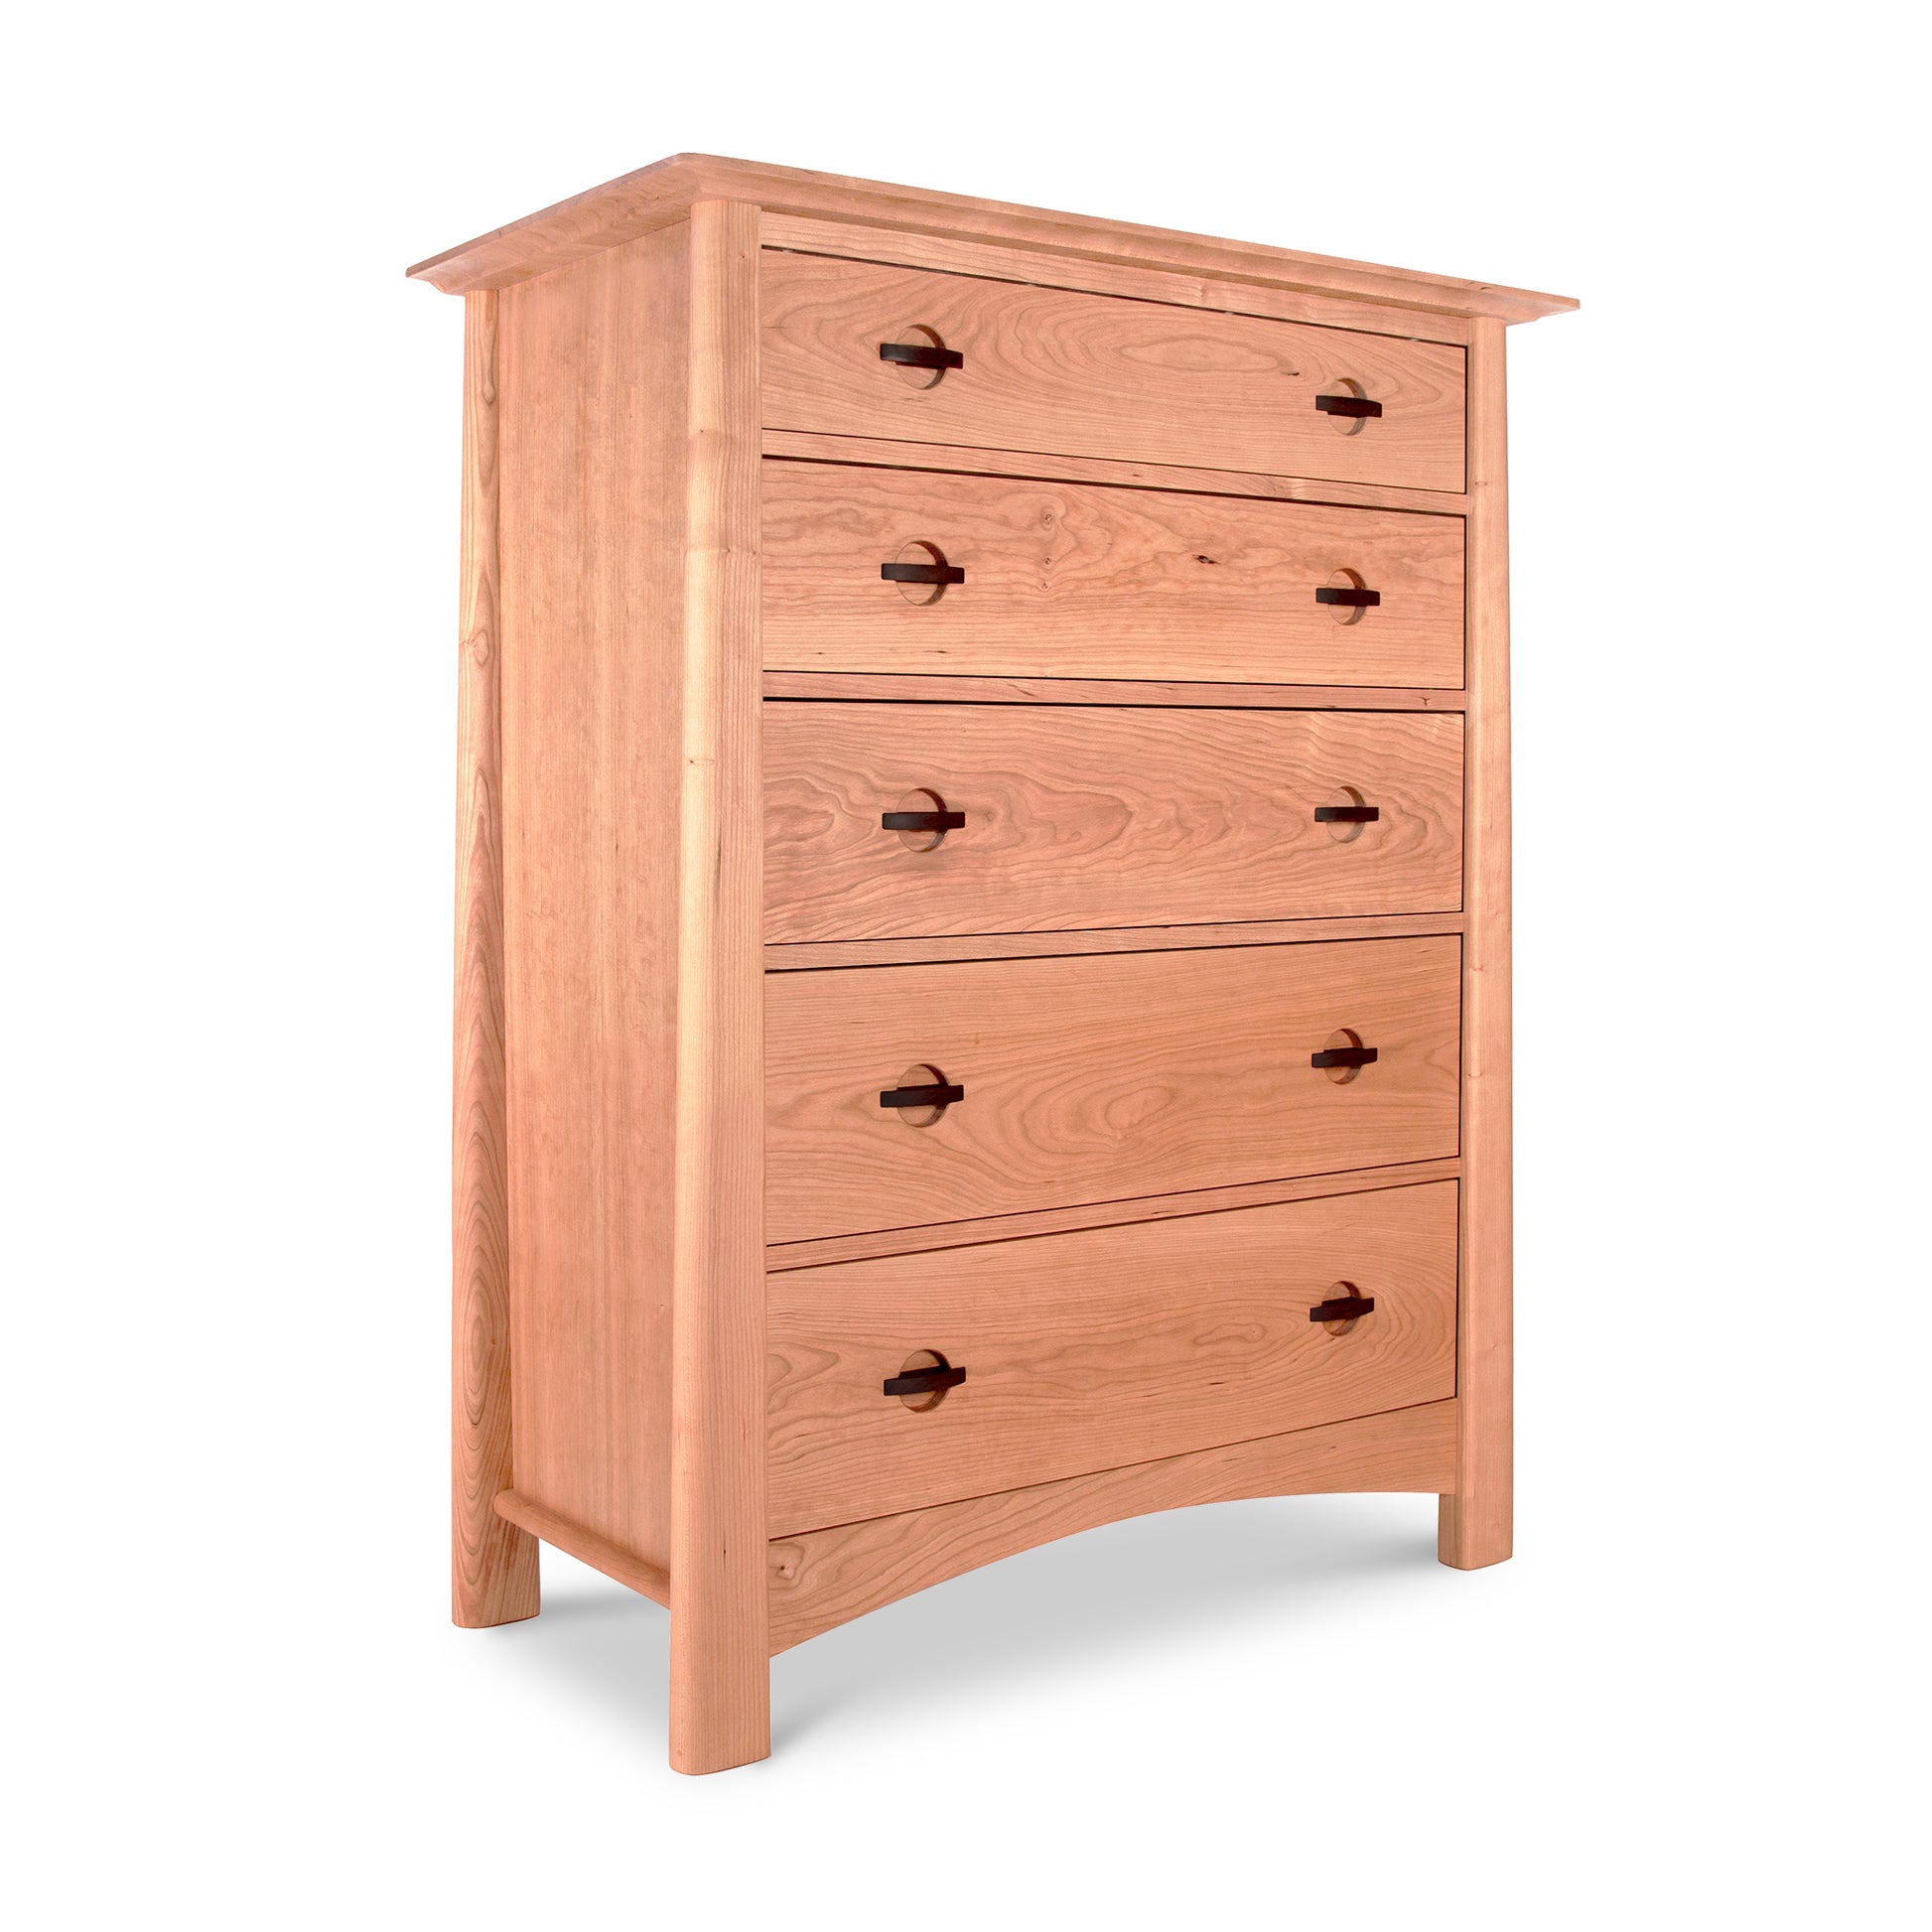 A Cherry Moon 5-Drawer Chest made of natural cherry wood, featuring rounded handles on each drawer, isolated against a white background.